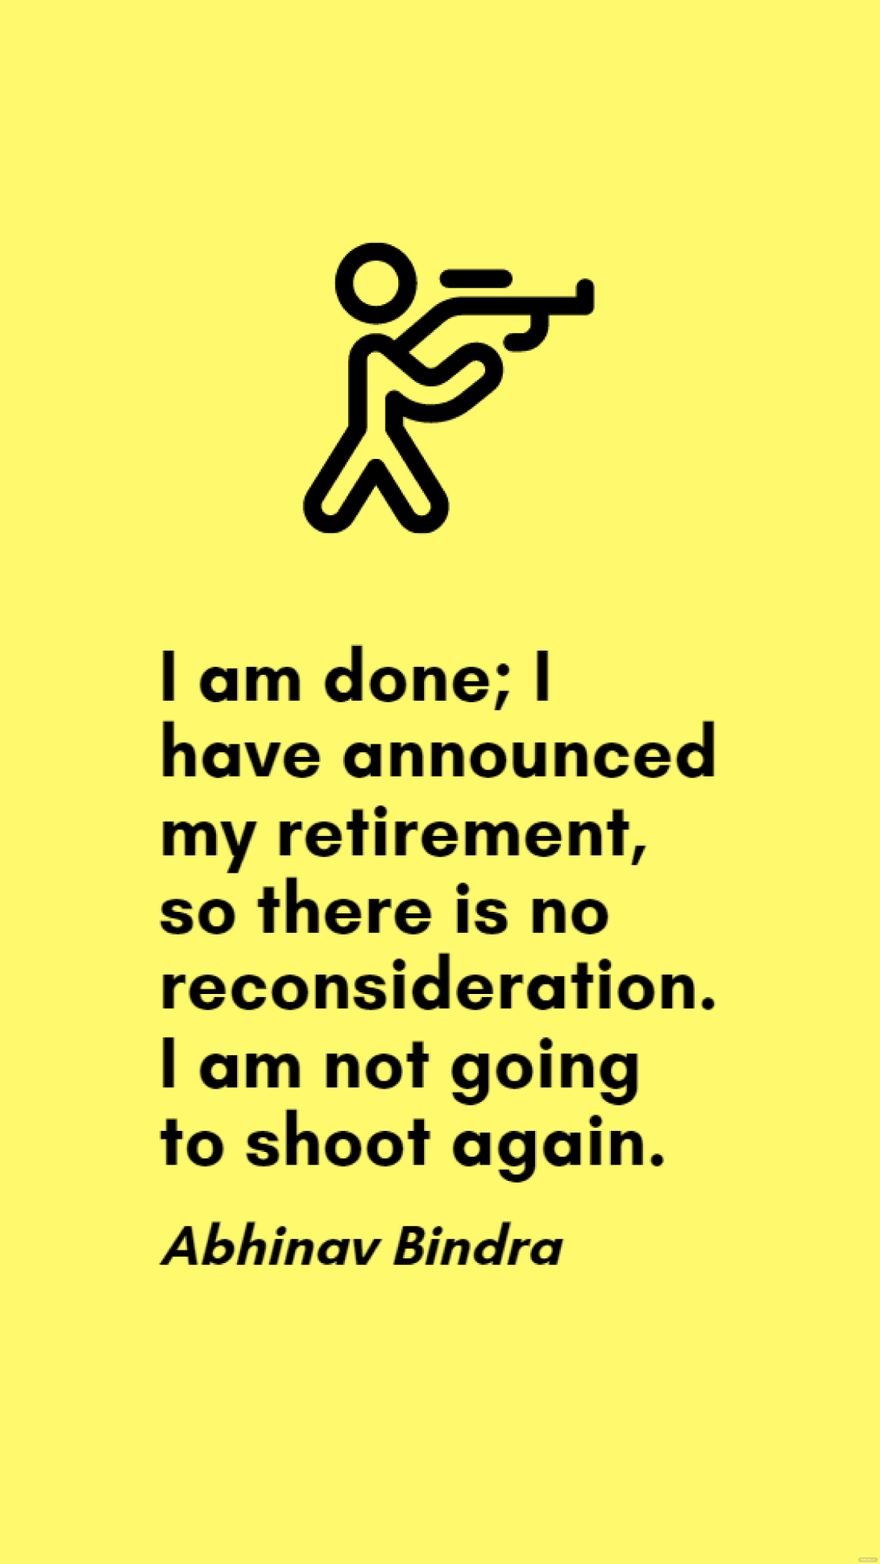 Free Abhinav Bindra - I am done; I have announced my retirement, so there is no reconsideration. I am not going to shoot again. in JPG